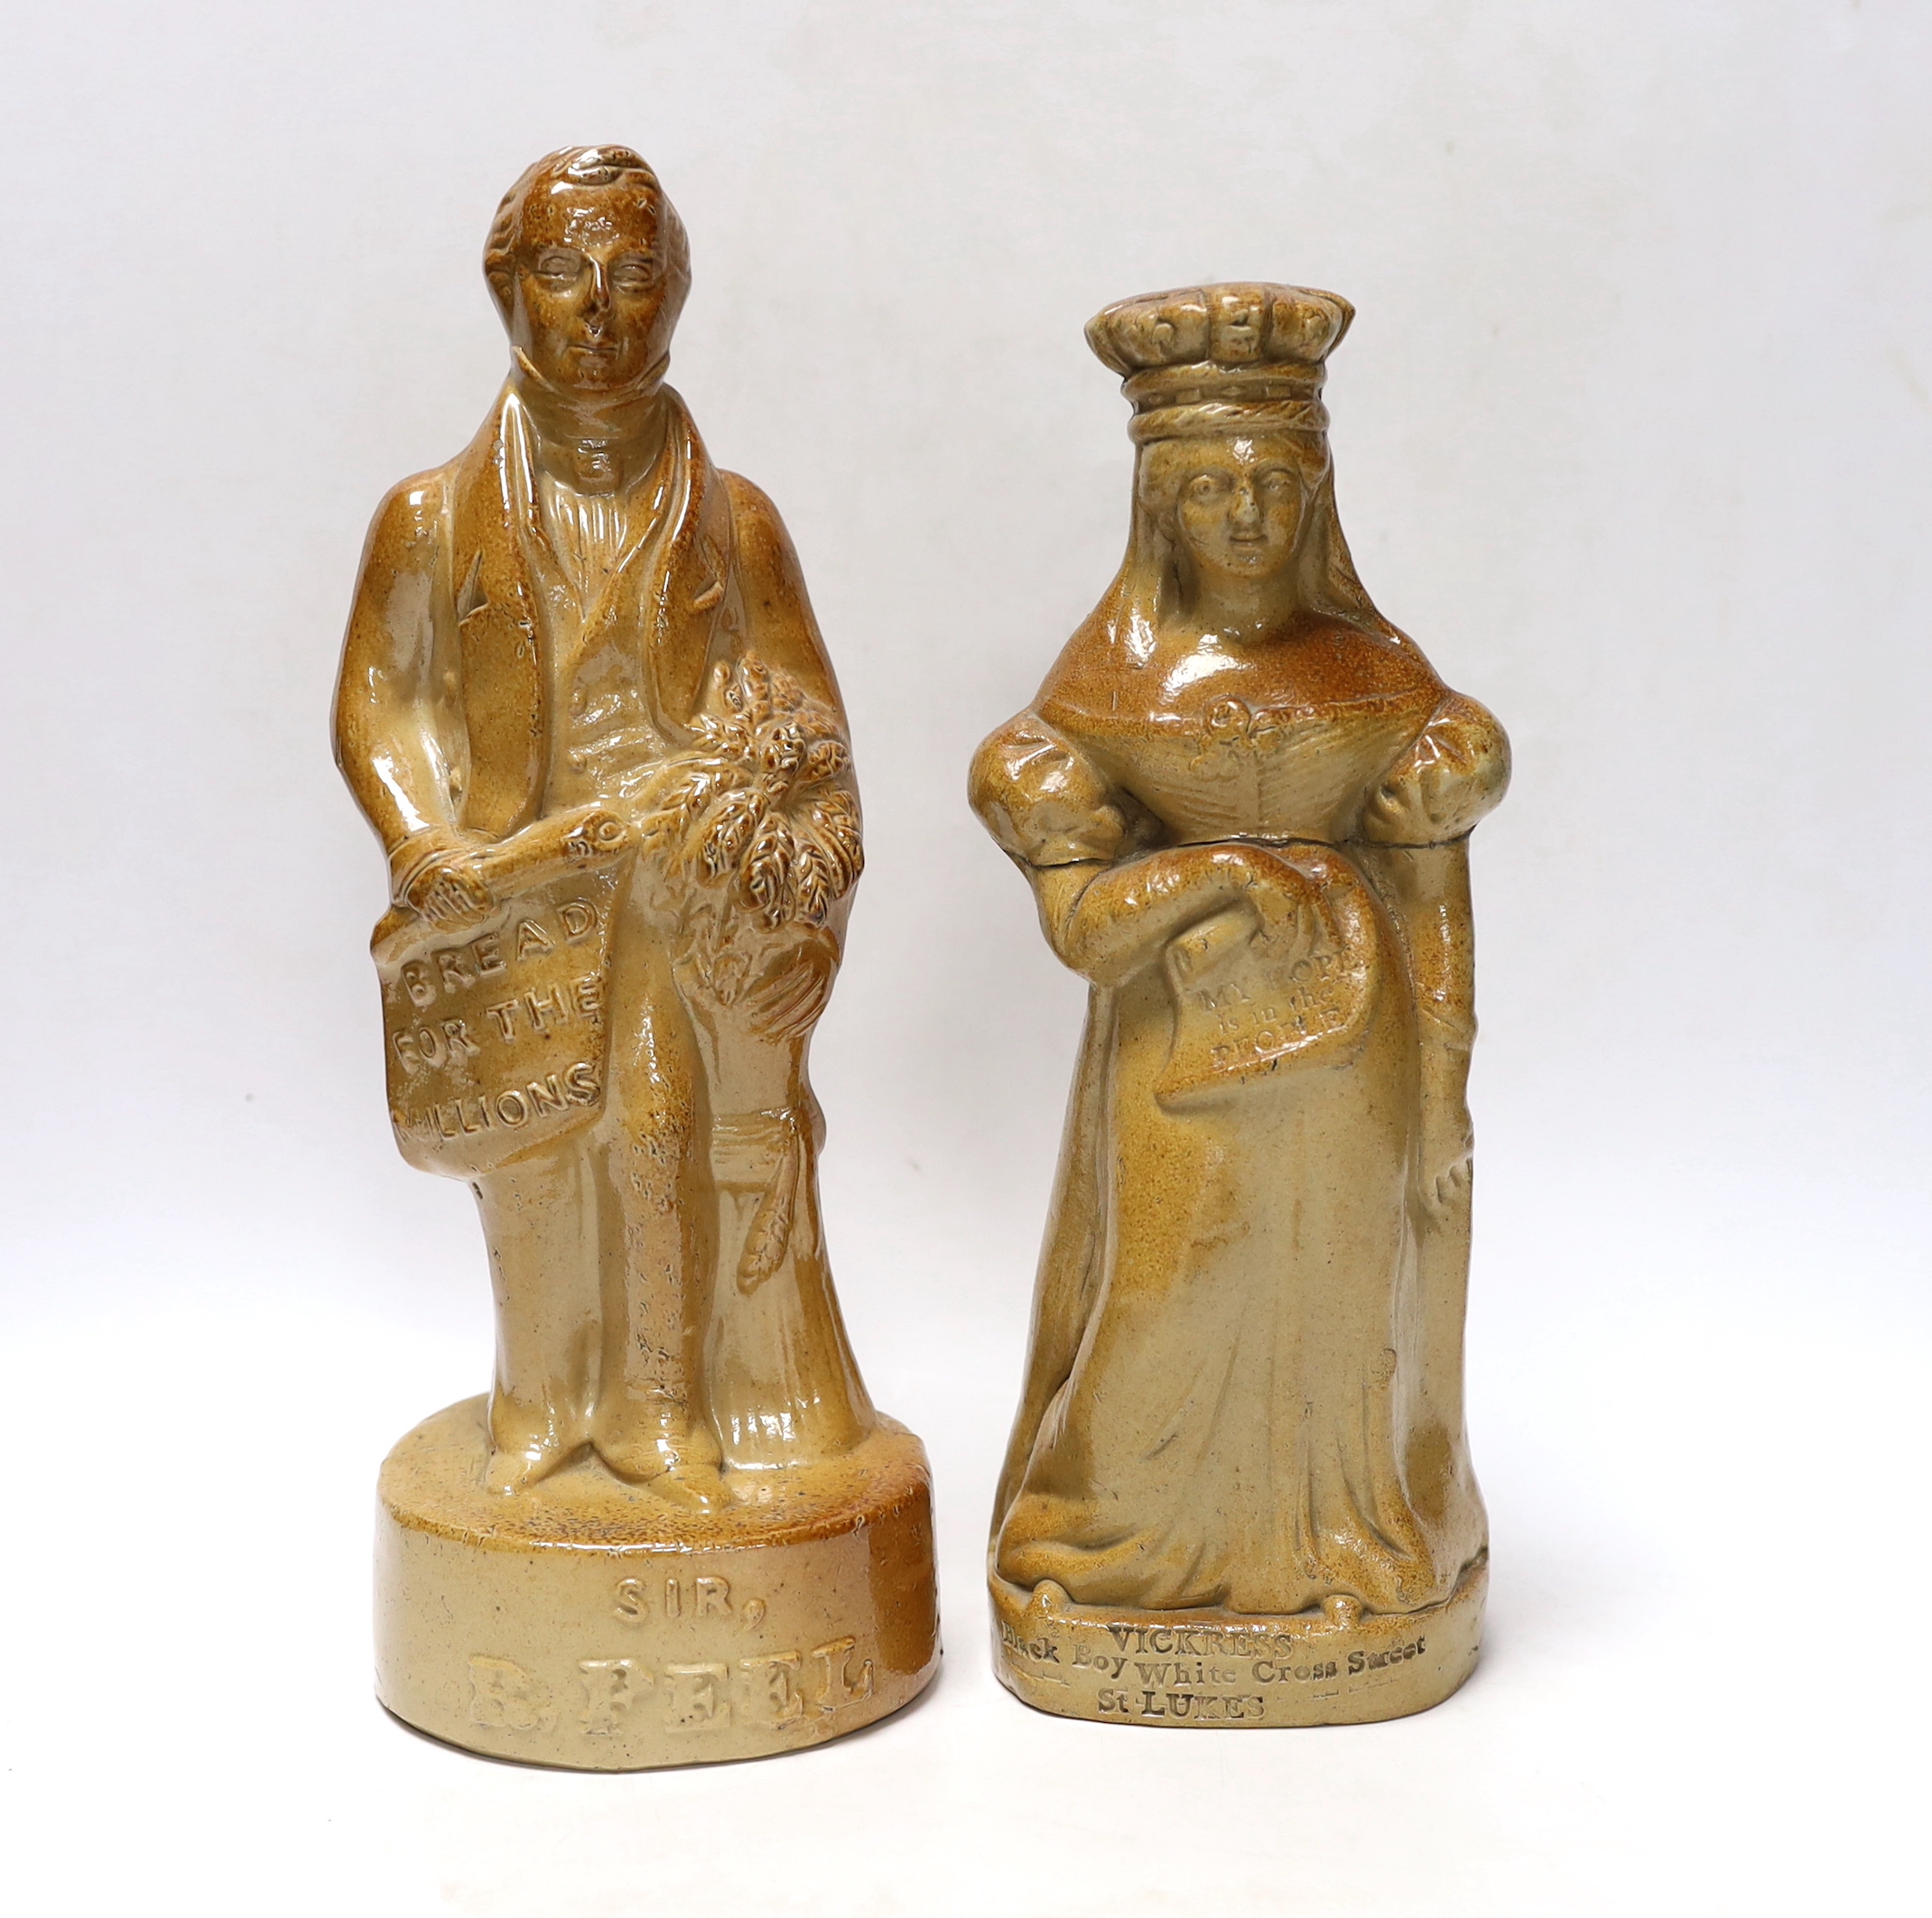 Two Victorian salt glaze spirit flasks, probably Lambeth, the first commemorating the repeal of the Corn Laws in 1846, modelled as Sir Robert Peel and the second modelled as Queen Victoria holding a scroll, impressed 